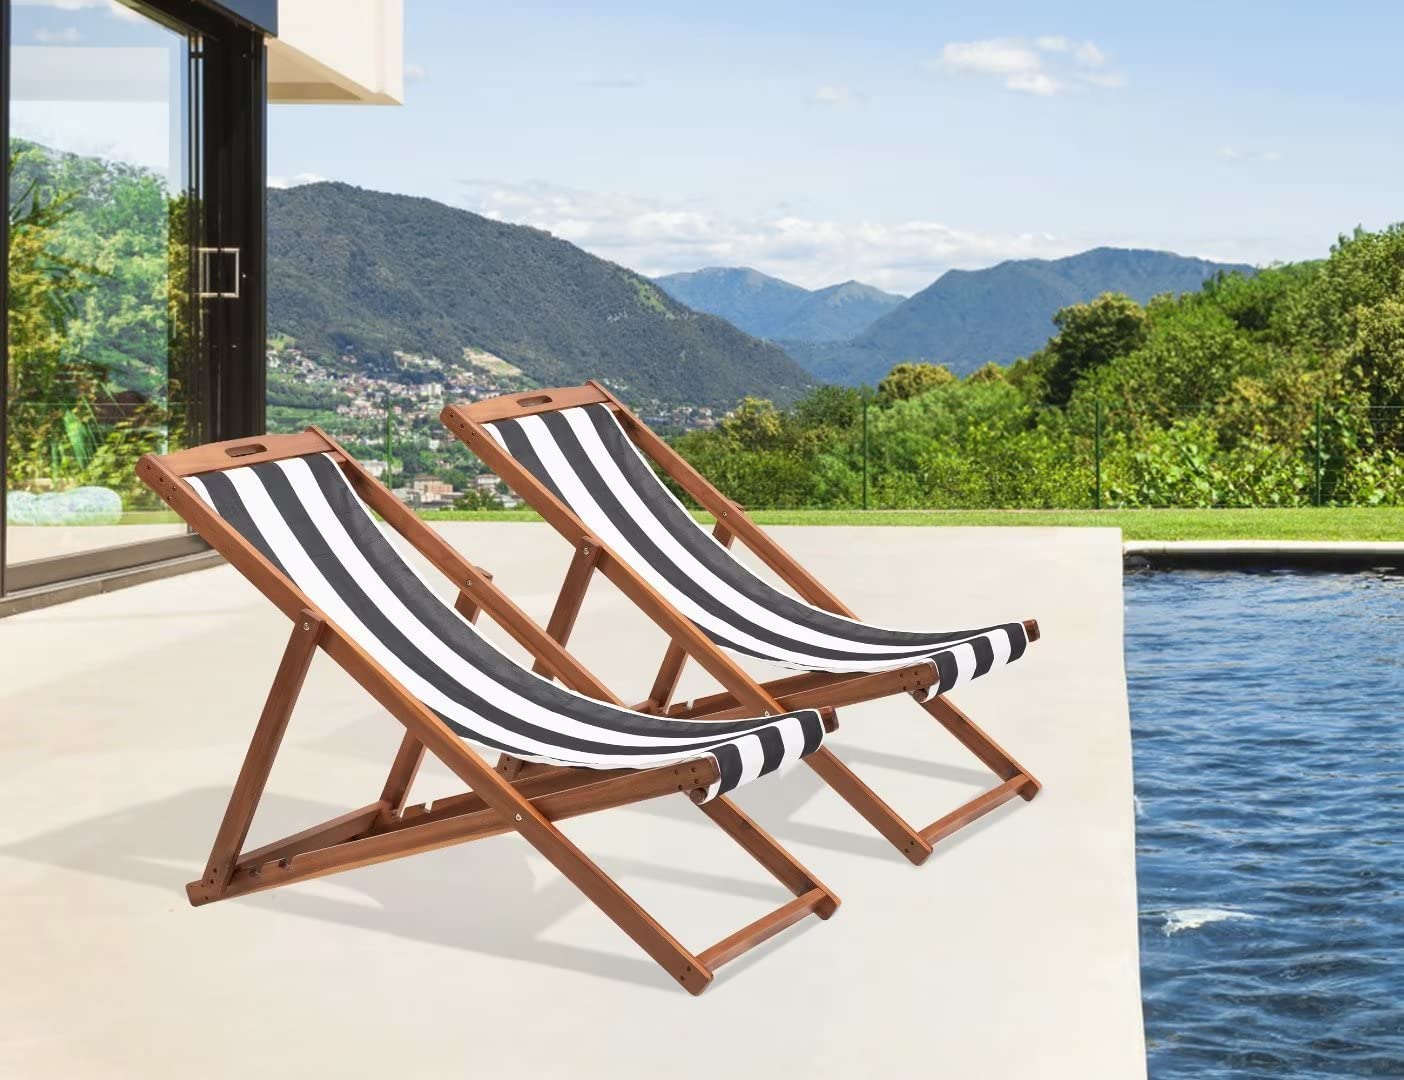 Beach Sling Chair Set of 2,  Adjustable Reclining Beach Chair  Outdoor Foldable Lounge Chairs for Garden, Backyard, Poolside, Balcony - image 1 of 7